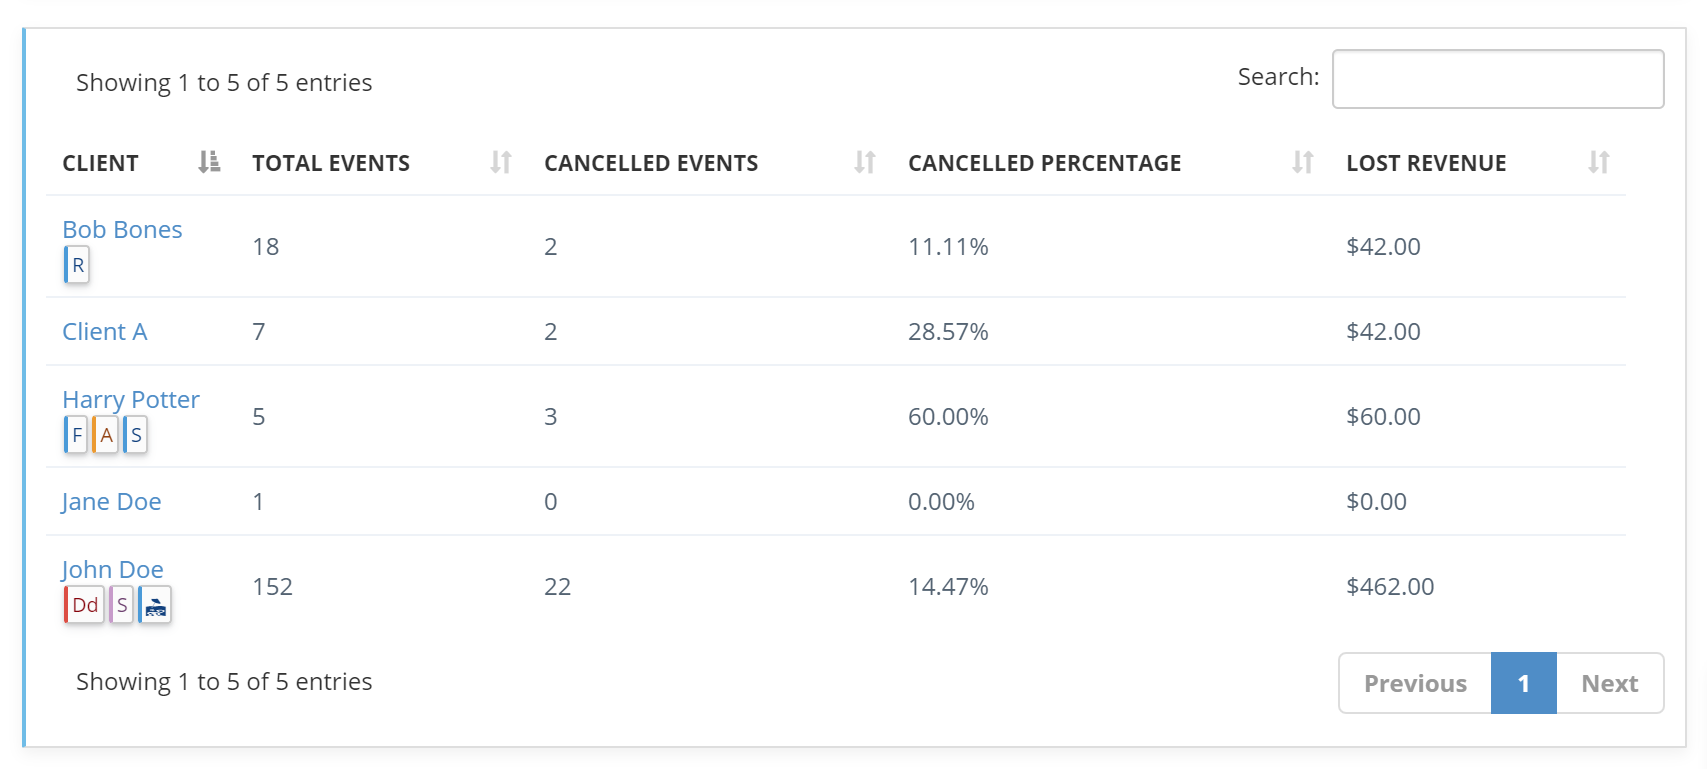 Cancelled Events Chart by Client